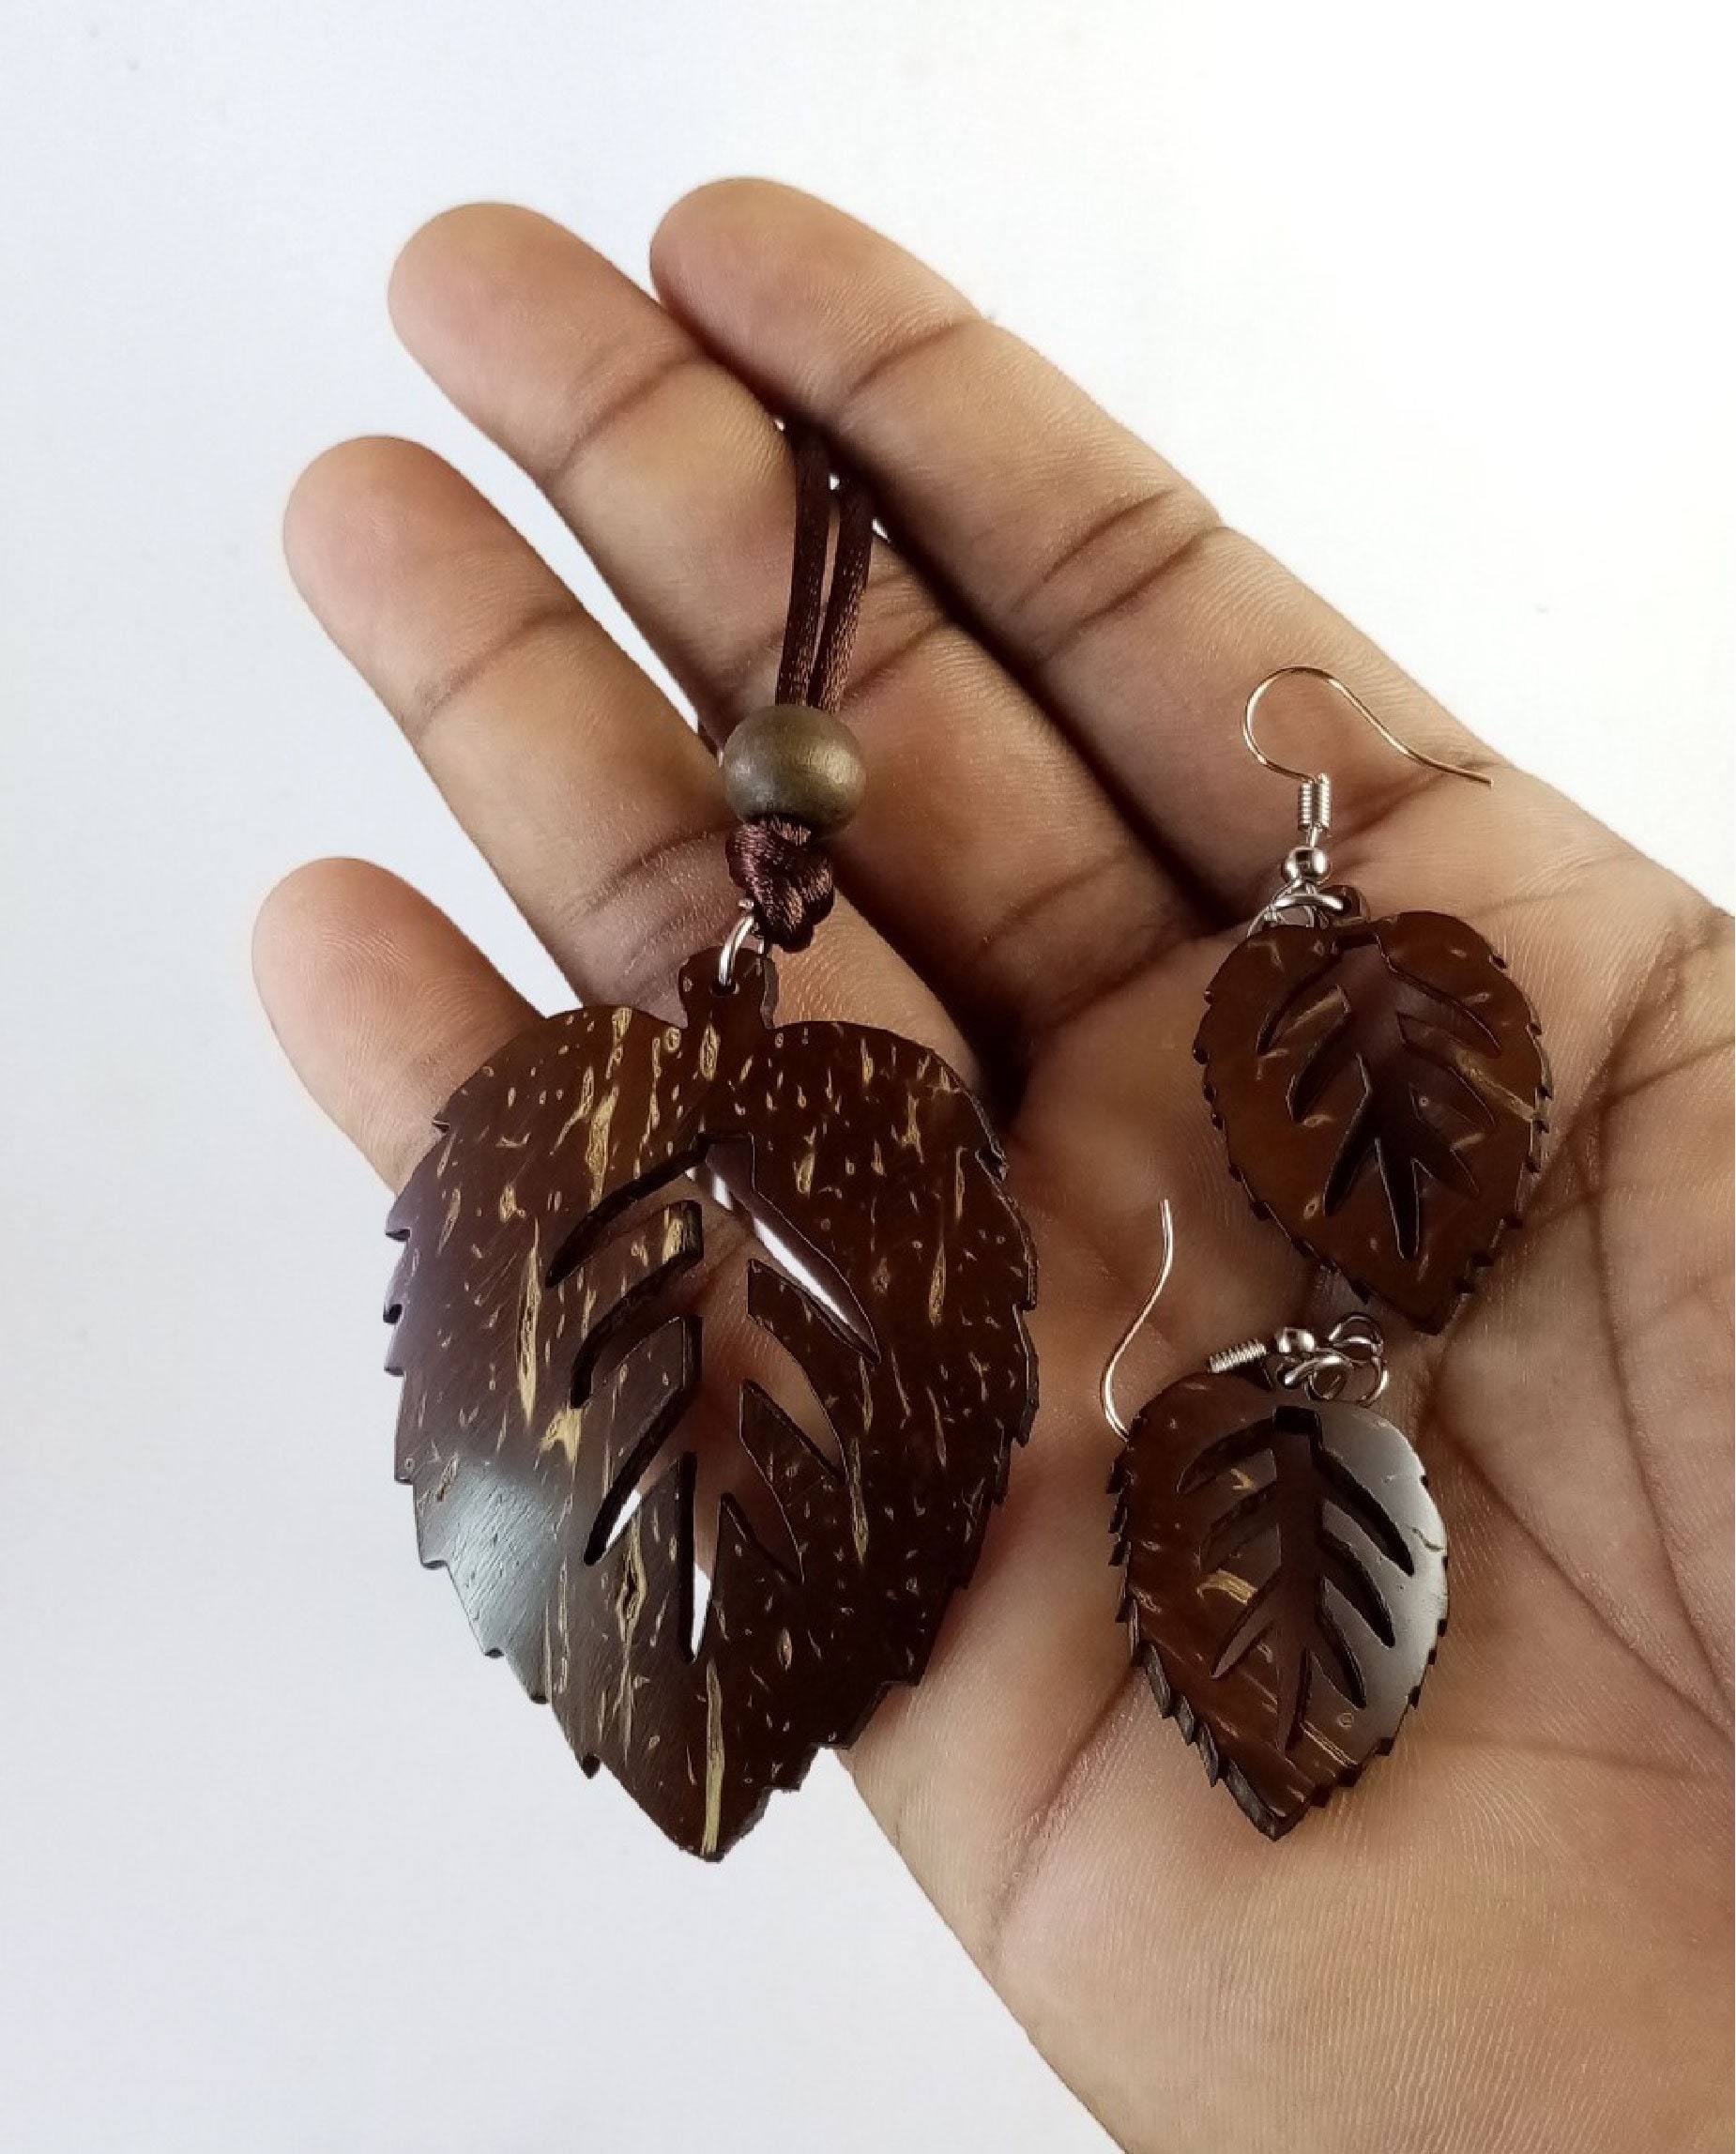 Kiva Store  Sese Wood Coconut Shell and Plastic Earrings from